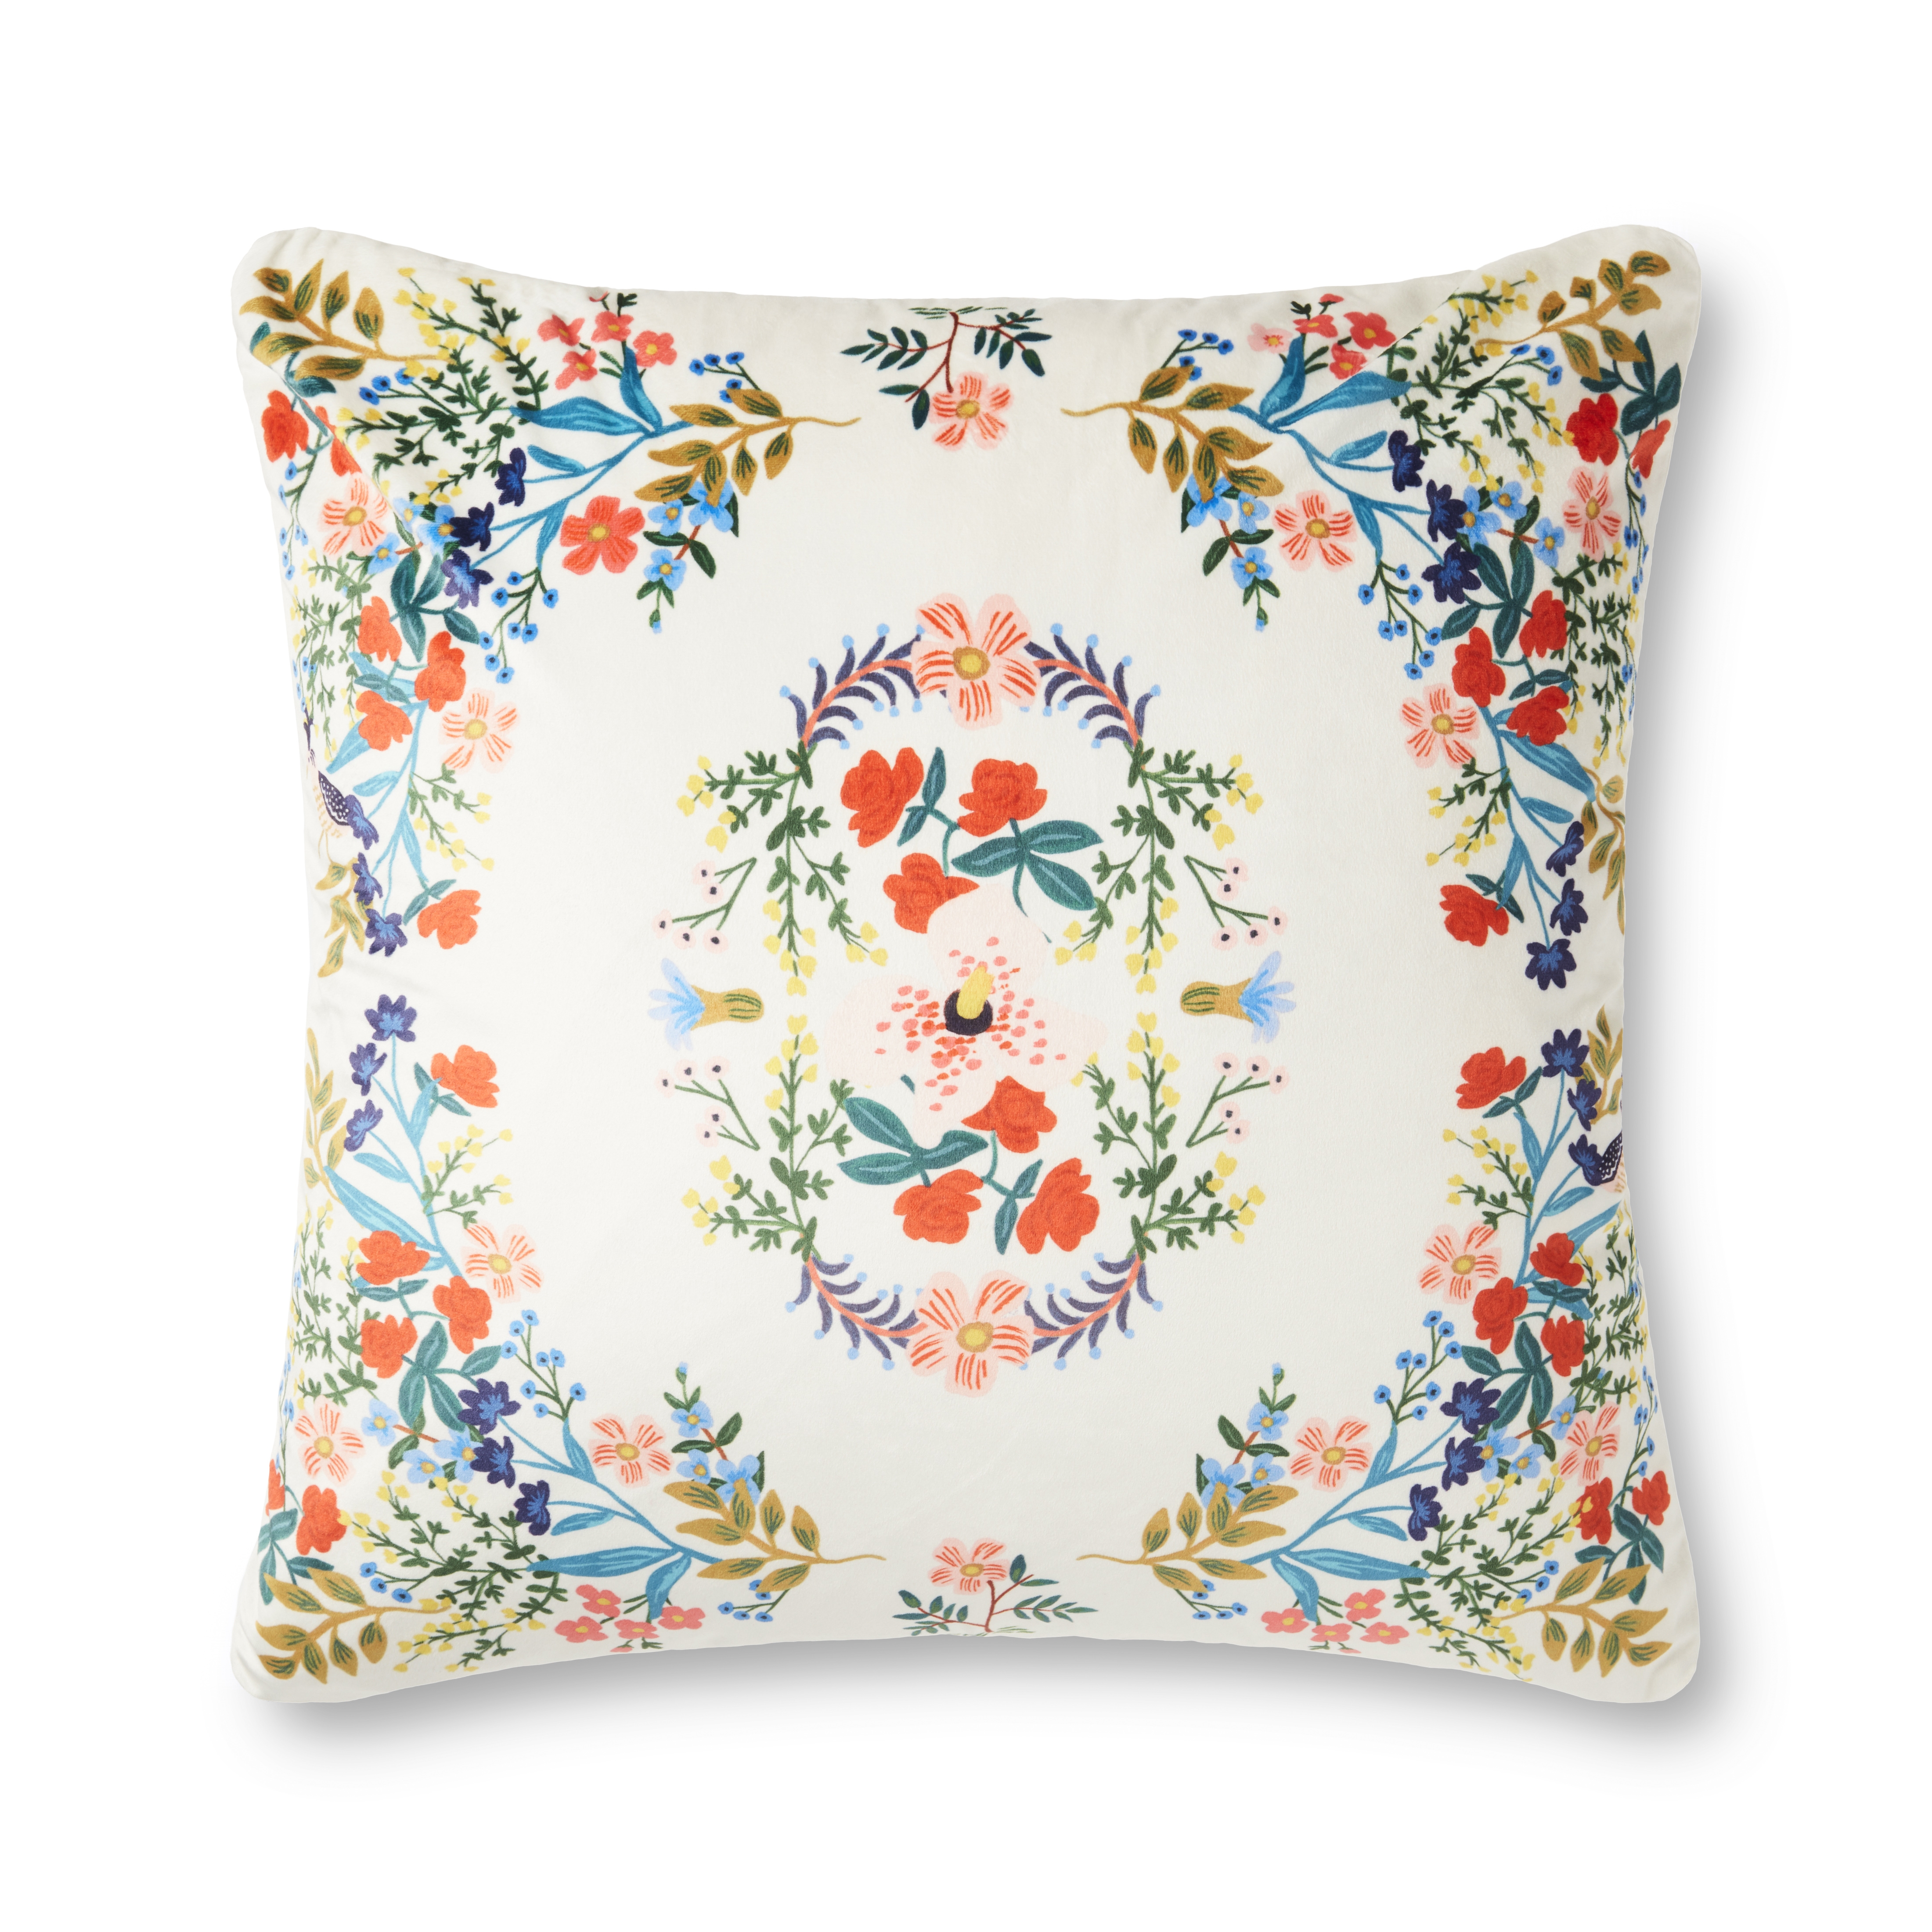 Rifle Paper Co. x Loloi Pillows P6058 Ivory / Multi 22" x 22" Cover Only - Image 0